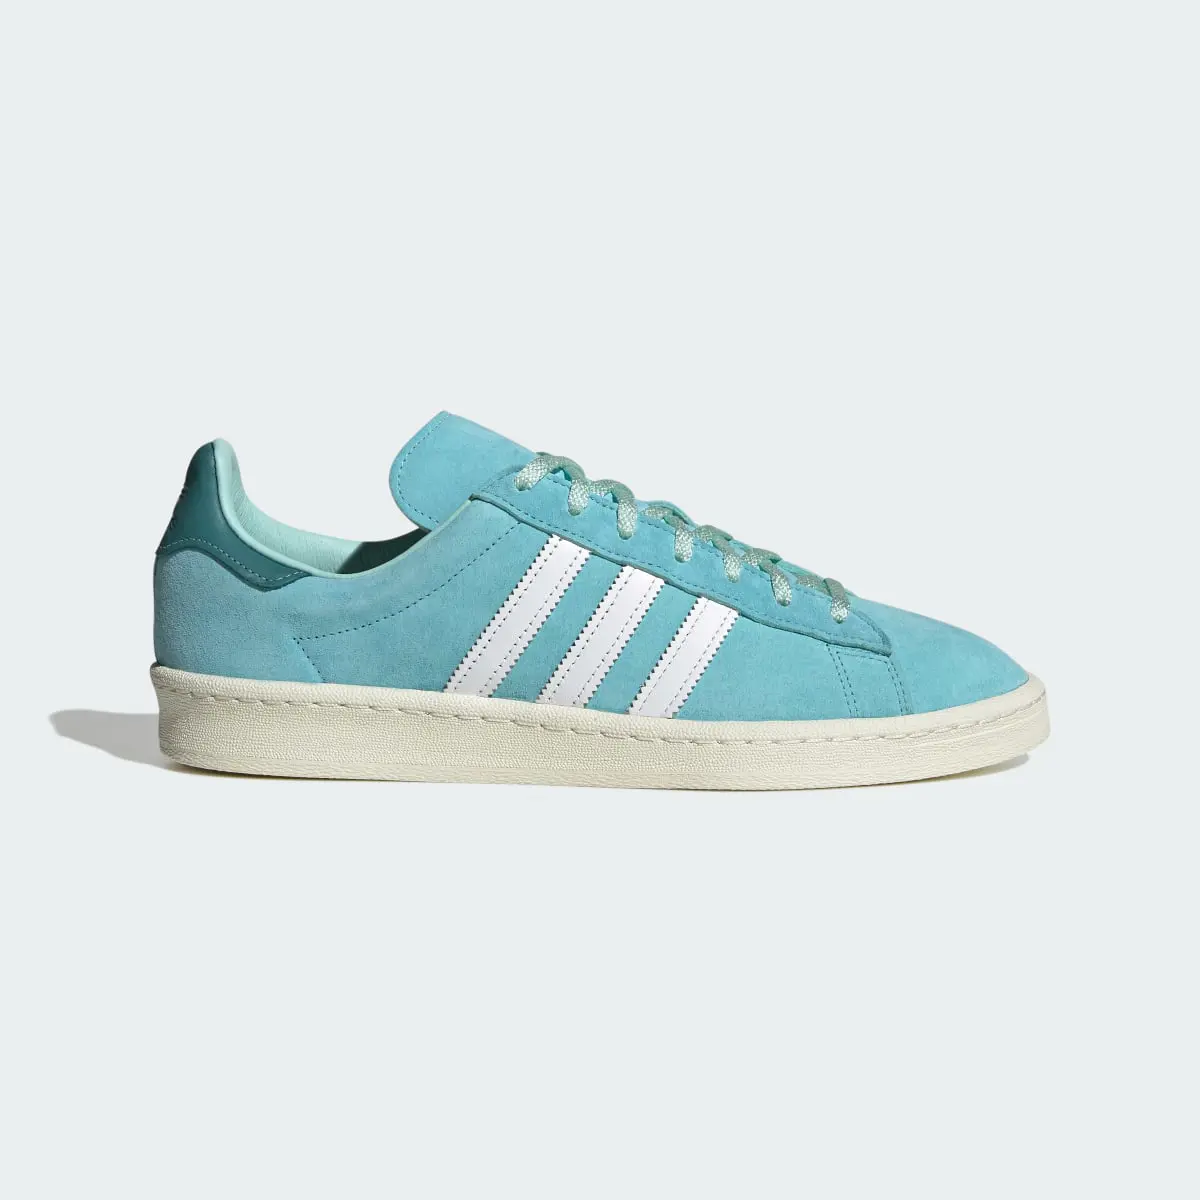 Adidas Campus 80s Shoes. 2